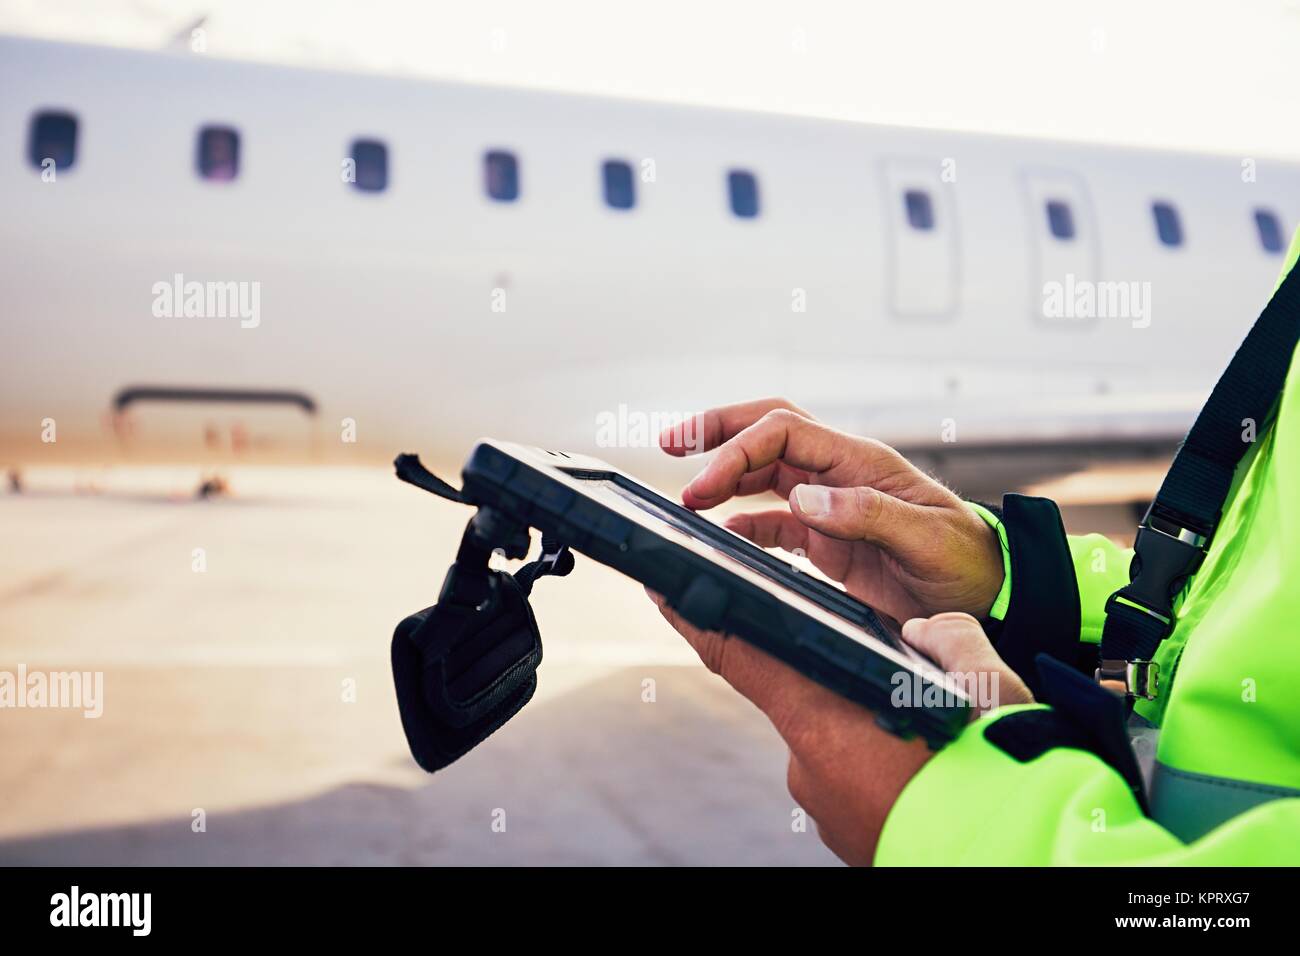 Modern technology at the airport. Member of the ground staff preparing the passenger airplane before flight. Stock Photo